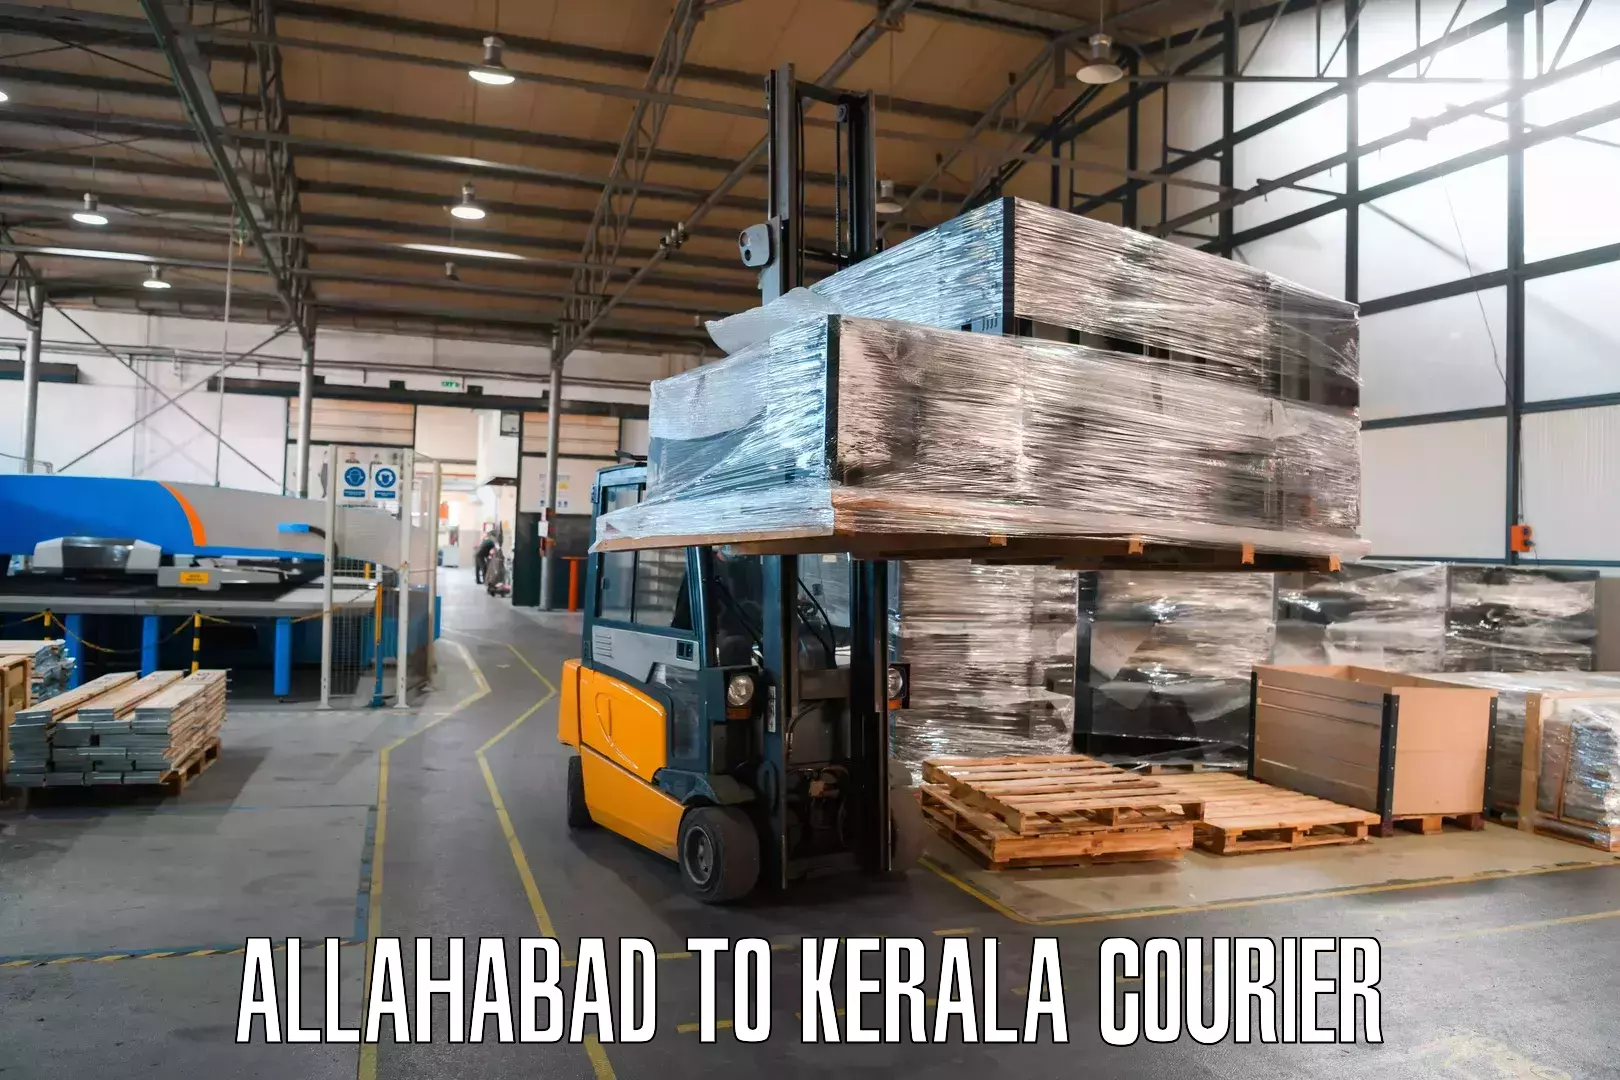 User-friendly courier app Allahabad to Trivandrum